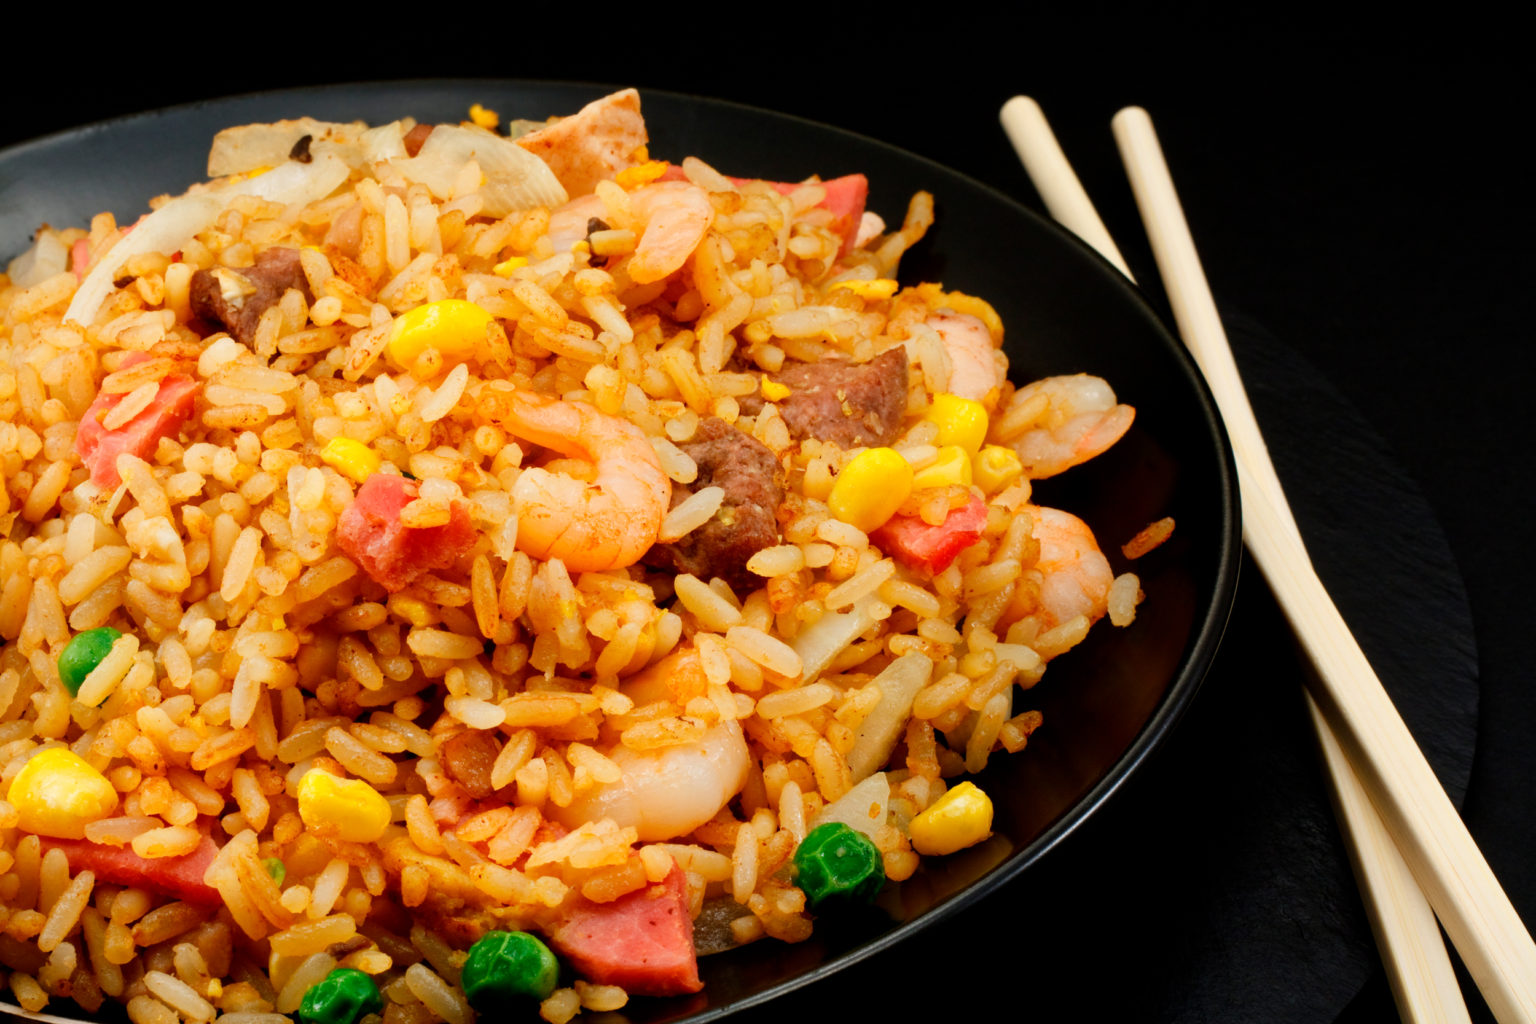 A plate of oriental food Special fried rice